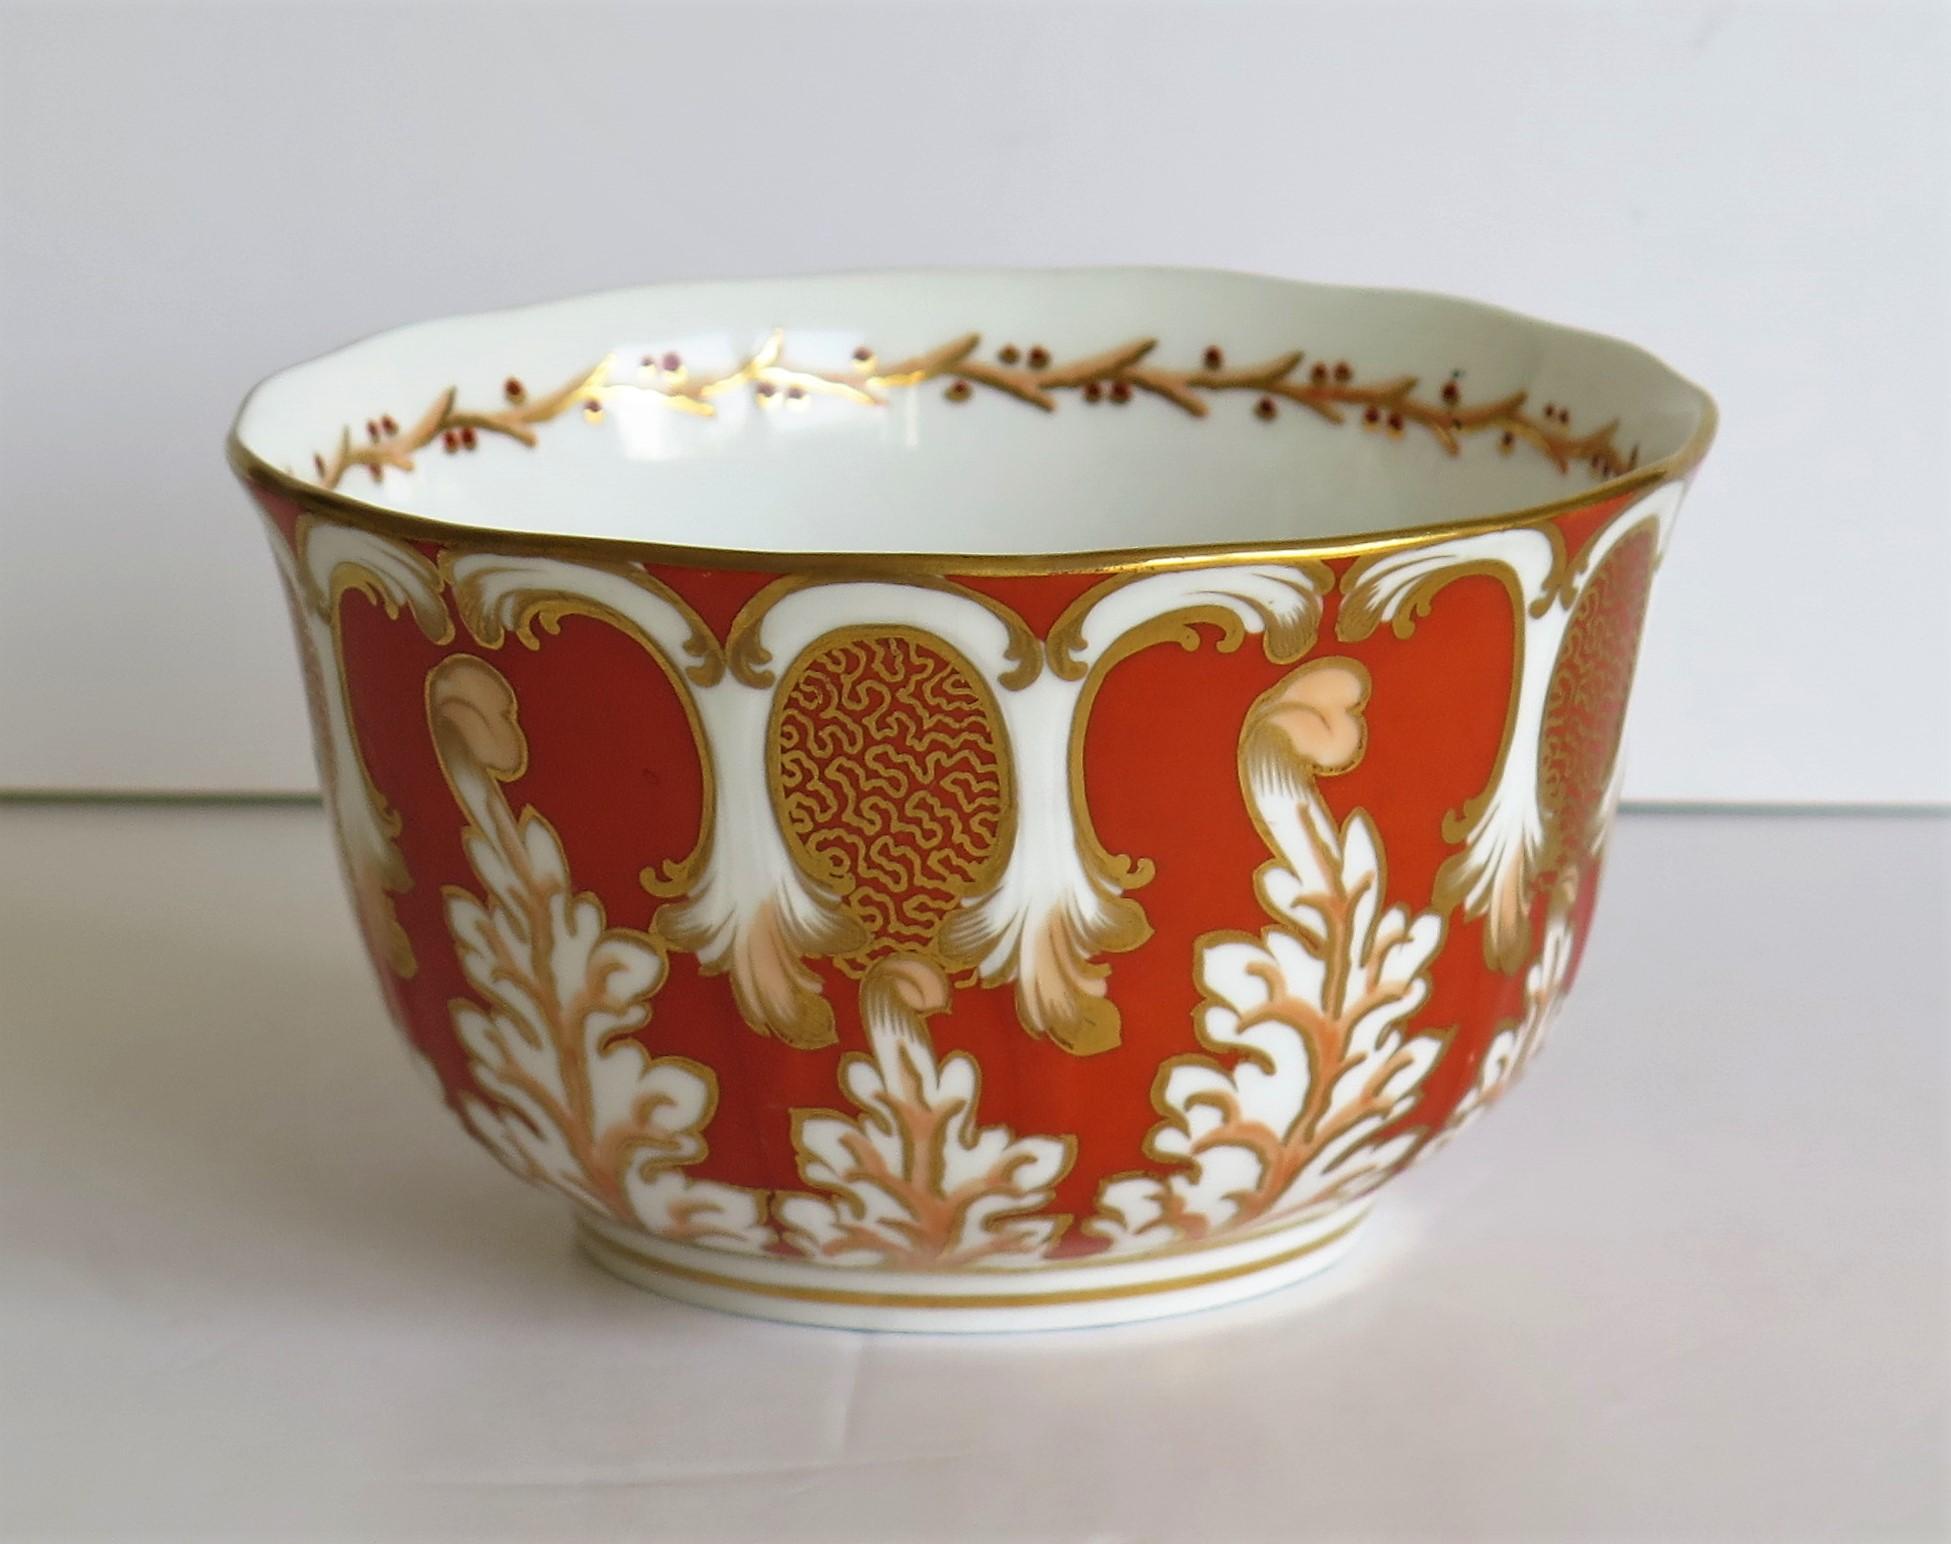 19th Century Davenport Porcelain Bowl in Pattern 2144 Fully Marked to Base, English, 1845